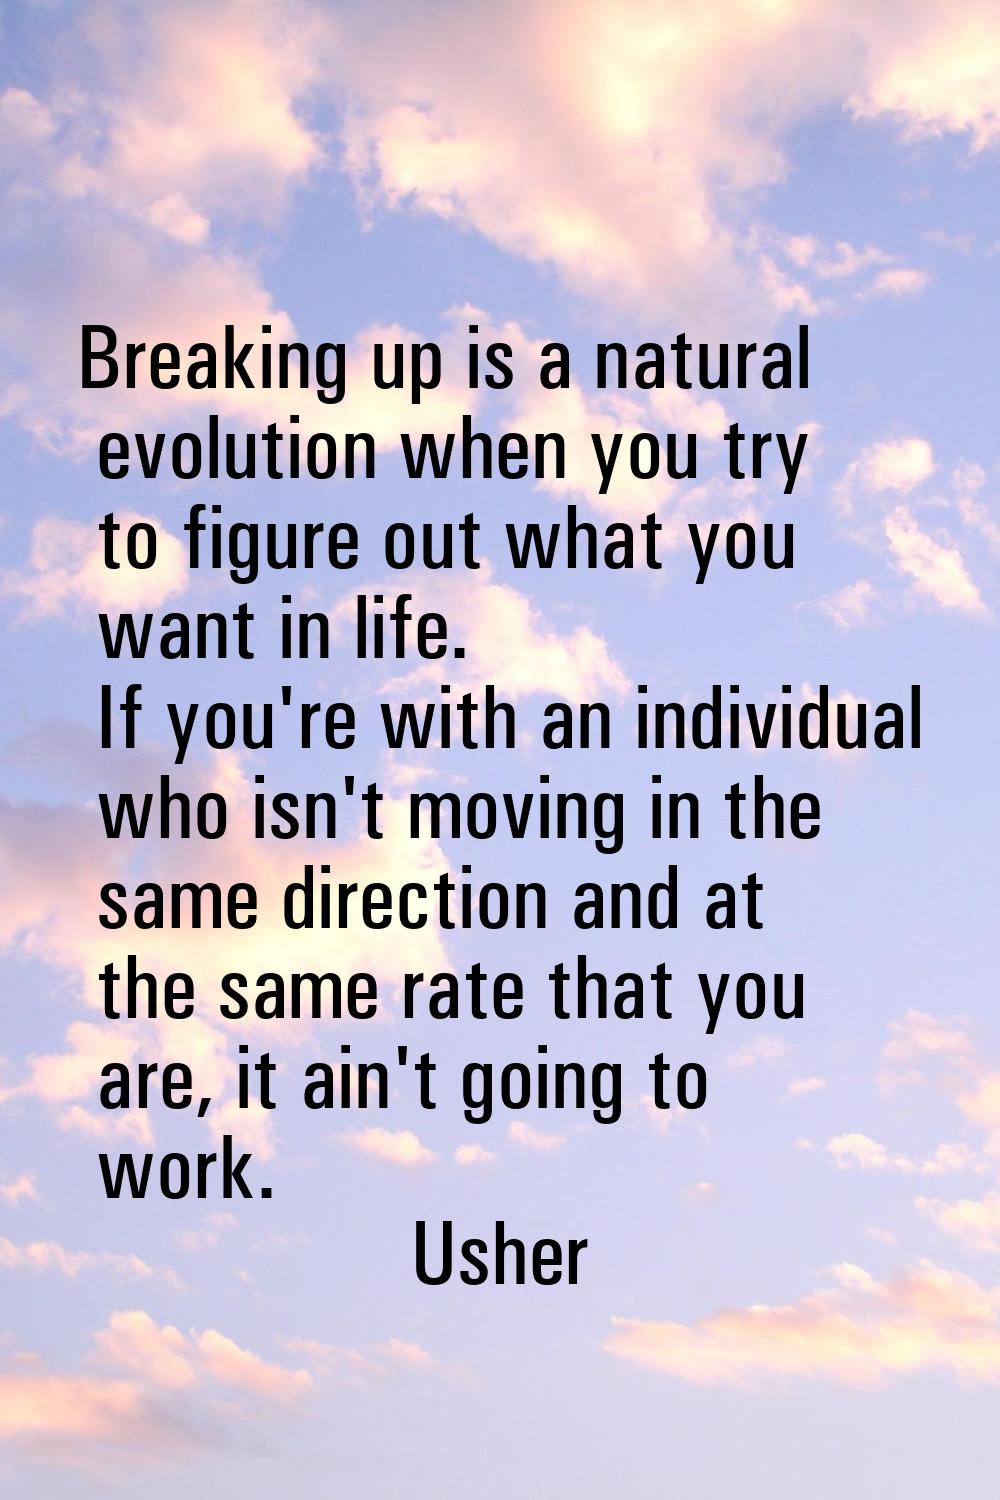 Breaking up is a natural evolution when you try to figure out what you want in life. If you're with